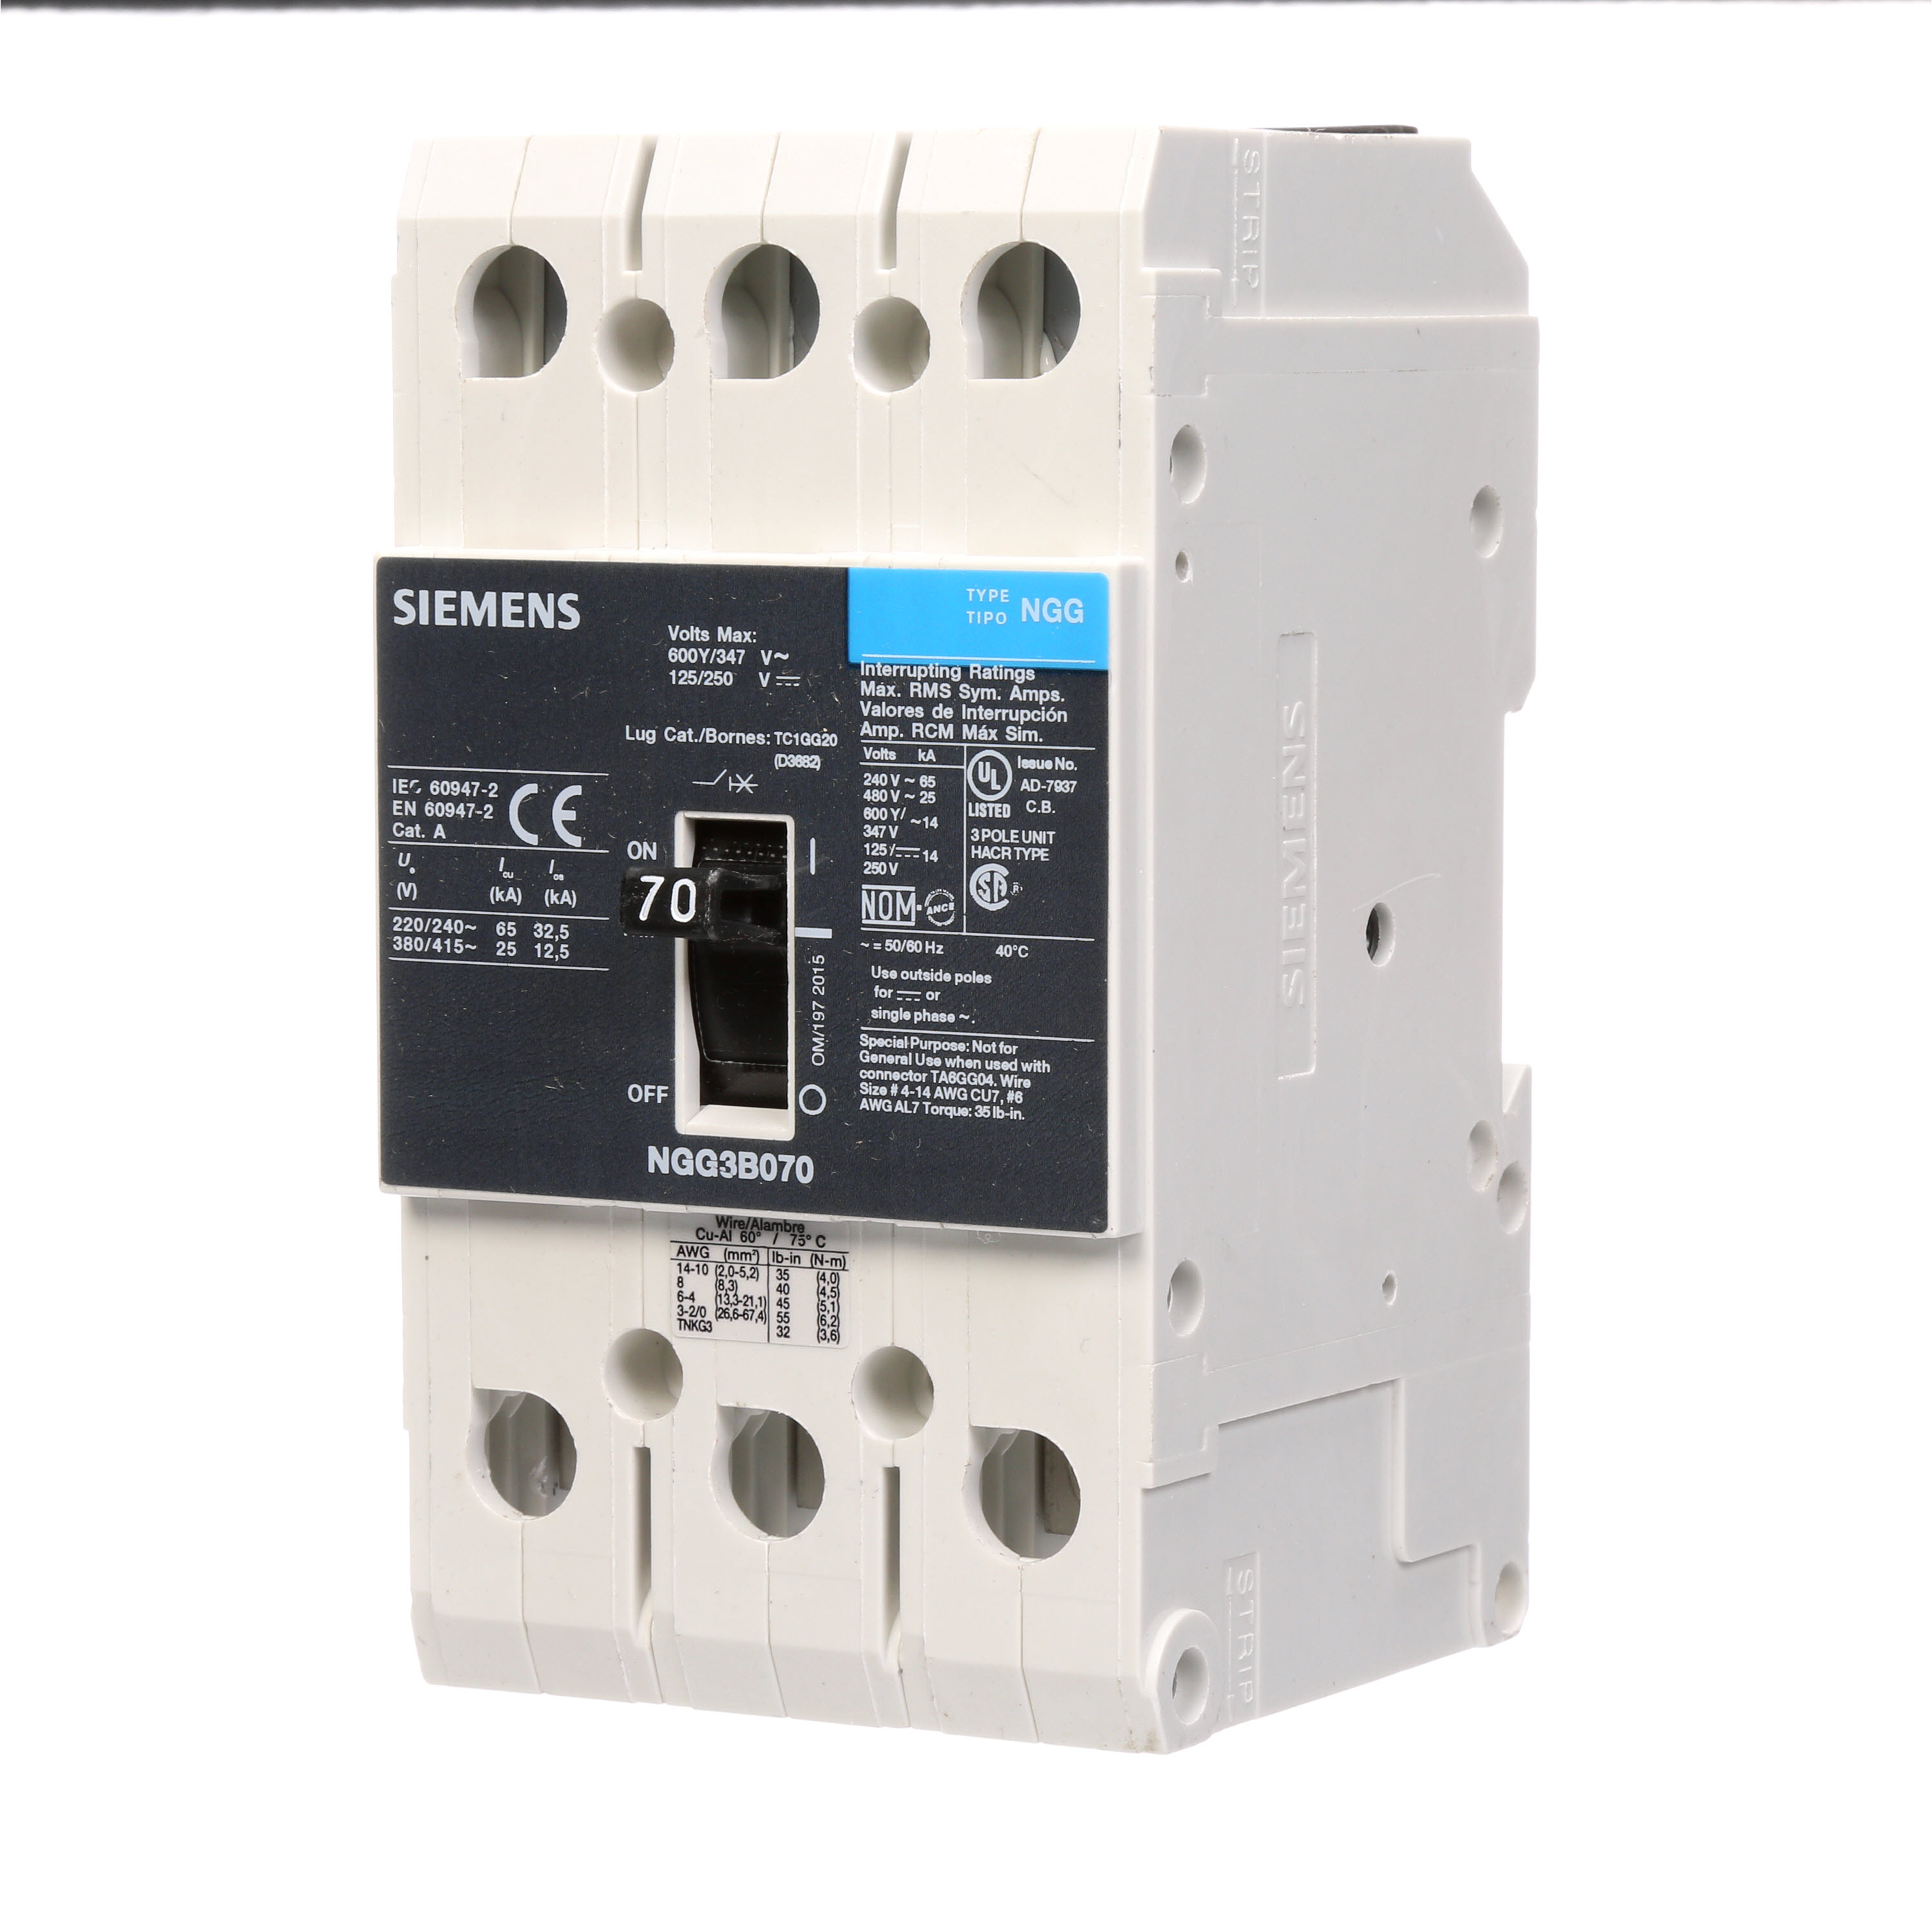 SIEMENS LOW VOLTAGE G FRAME CIRCUIT BREAKER WITH THERMAL - MAGNETIC TRIP. UL LISTED NGG FRAME WITH STANDARD BREAKING CAPACITY. 70A 3-POLE (14KAIC AT 600Y/347V)(25KAIC AT 480V). SPECIAL FEATURES MOUNTS ON DIN RAIL / SCREW, LINE AND LOAD SIDE LUGS (TC1GG20) WIRE RANGE 8 - 1/0 AWS (CU/AL). DIMENSIONS (W x H x D) IN 3 x 5.4 x 2.8.